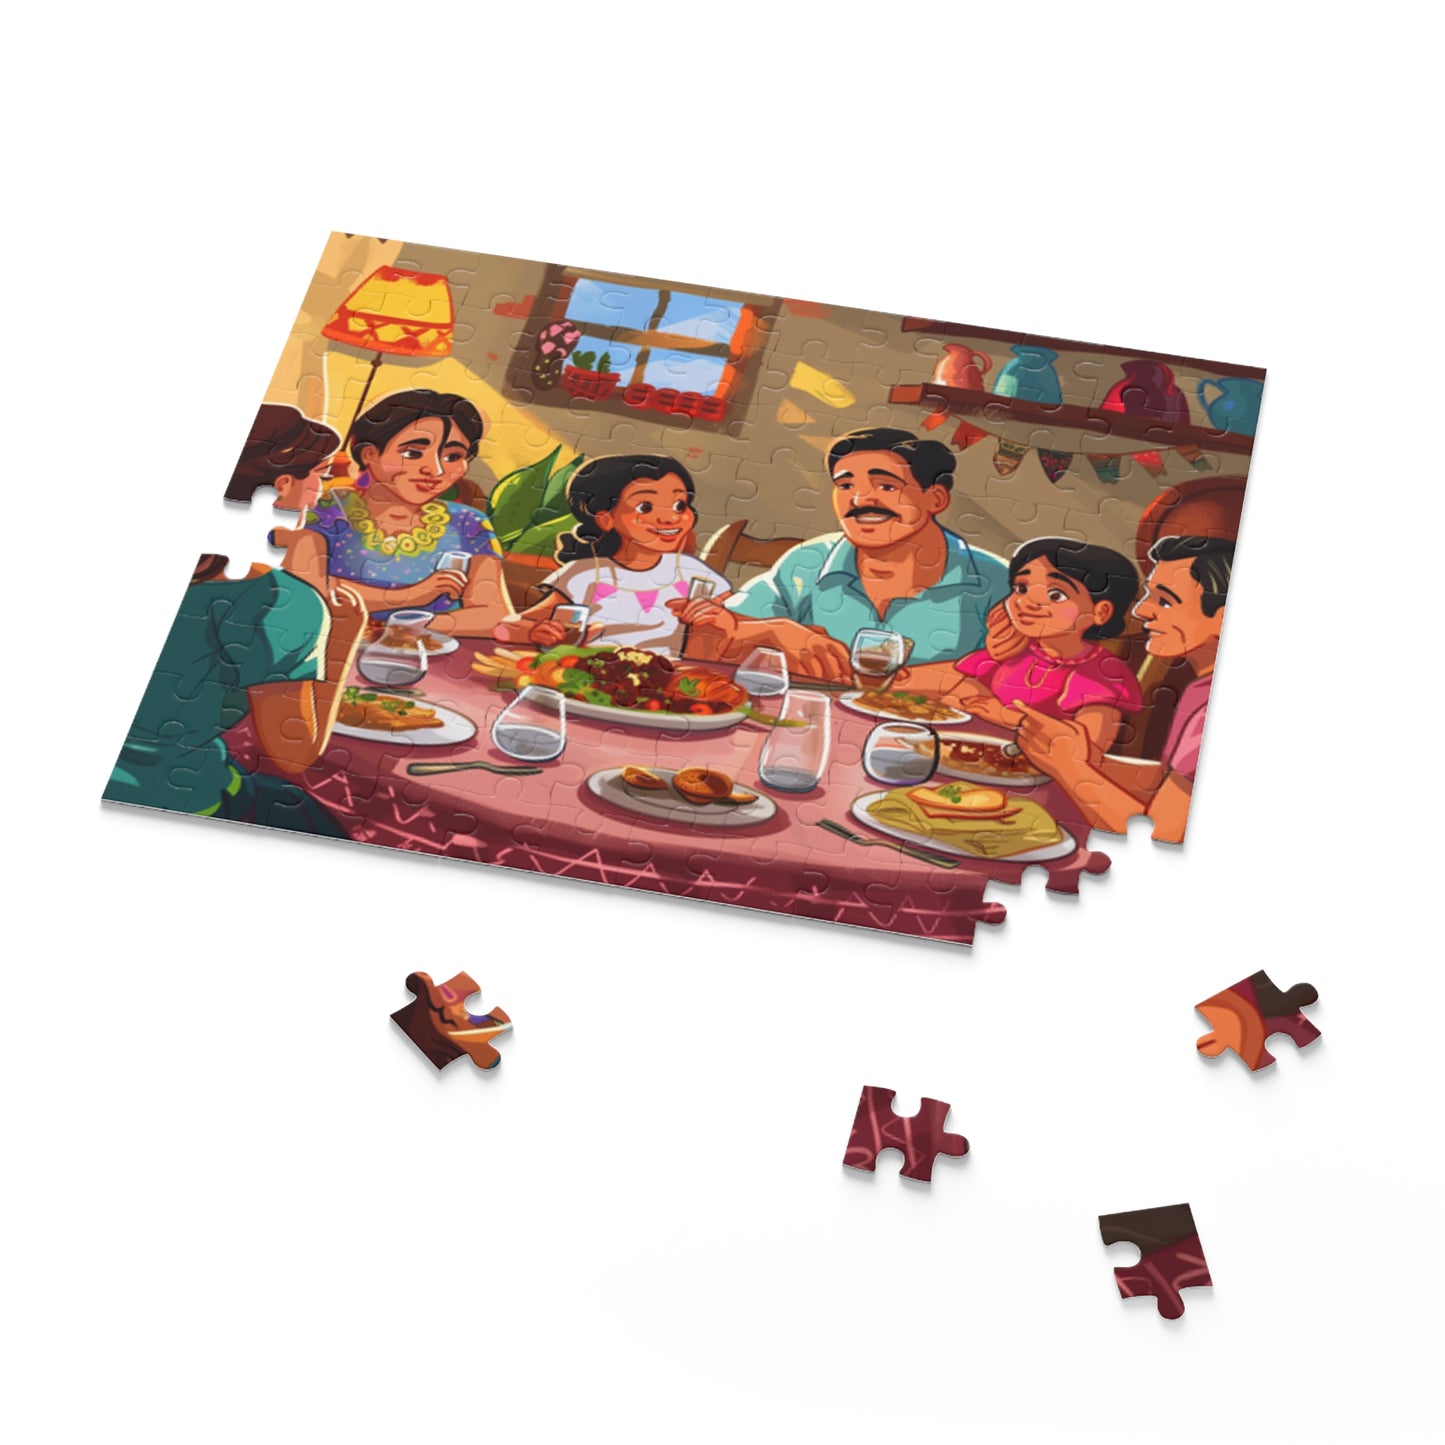 Mexican Art Family Retro Jigsaw Puzzle Adult Birthday Business Jigsaw Puzzle Gift for Him Funny Humorous Indoor Outdoor Game Gift For Her Online-7